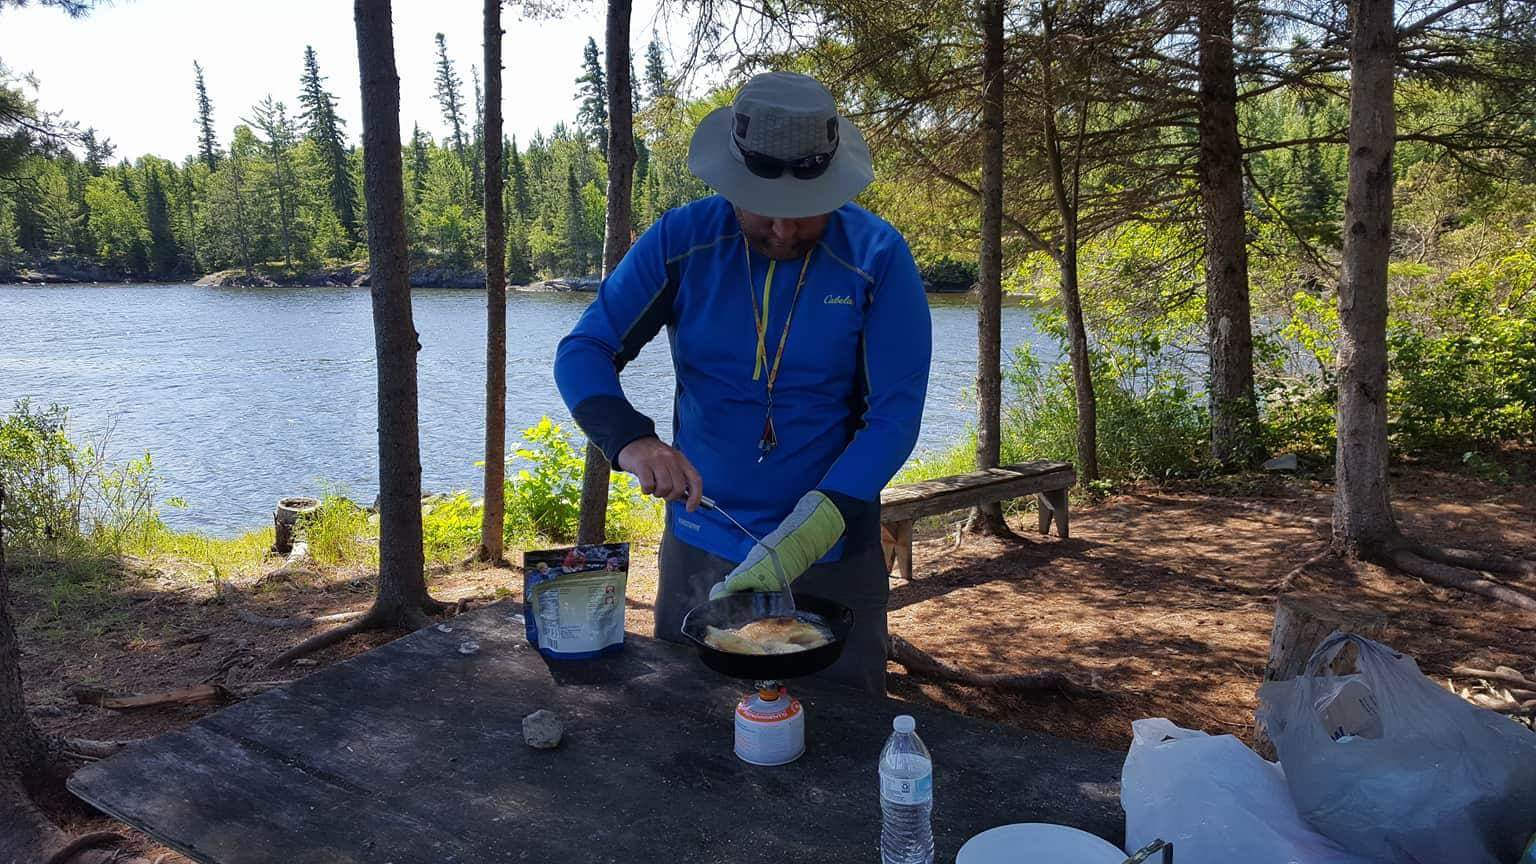 My buddy Jim, cooking up some walleye on a Floating Lodges Houseboat vacation at a shore-lunch site.